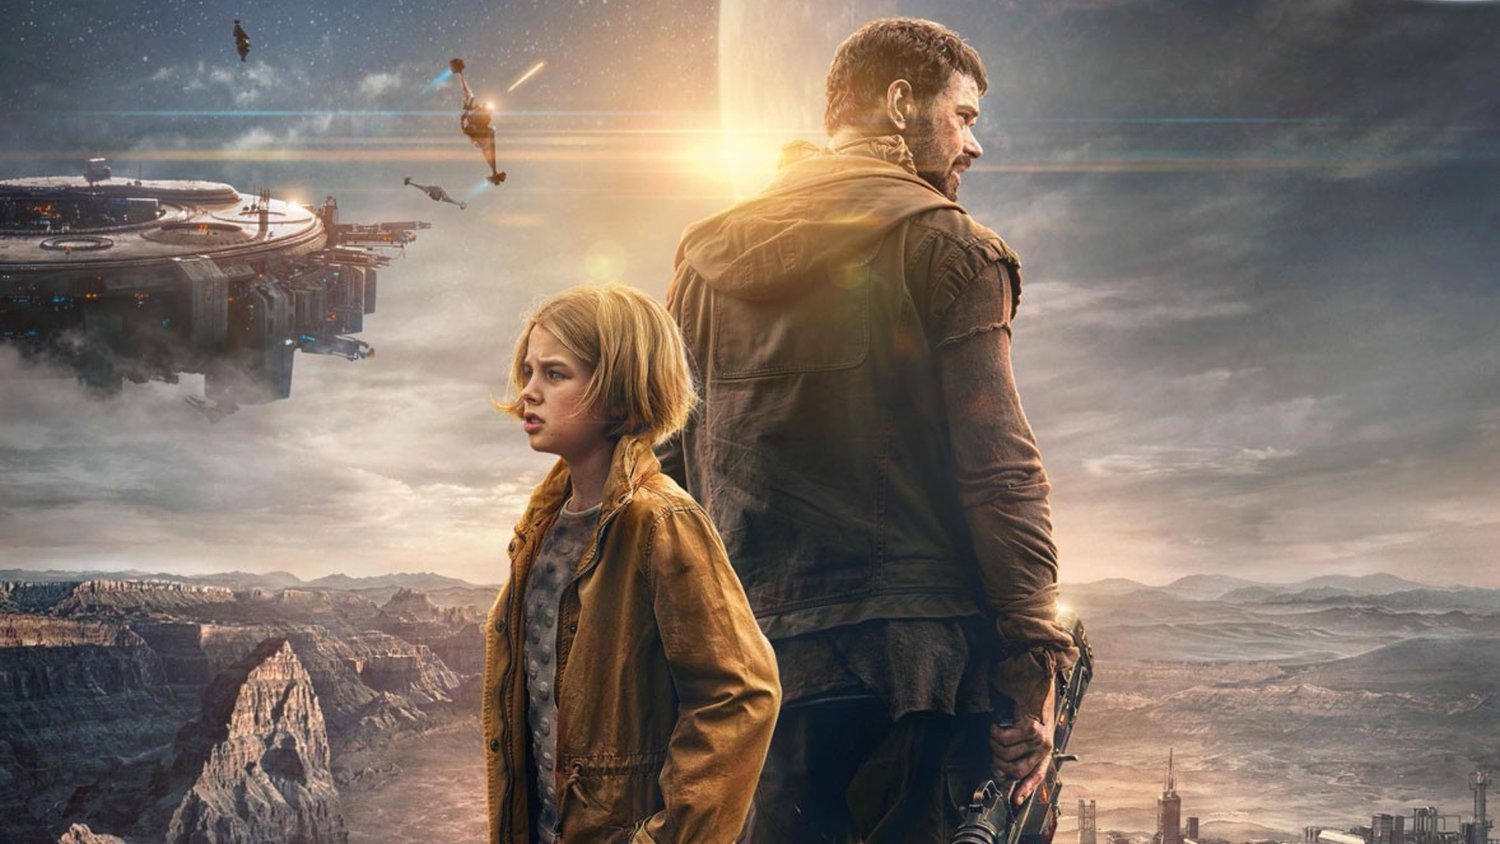 Cool New Trailer for the SciFi Action Thriller THE OSIRIS CHILD